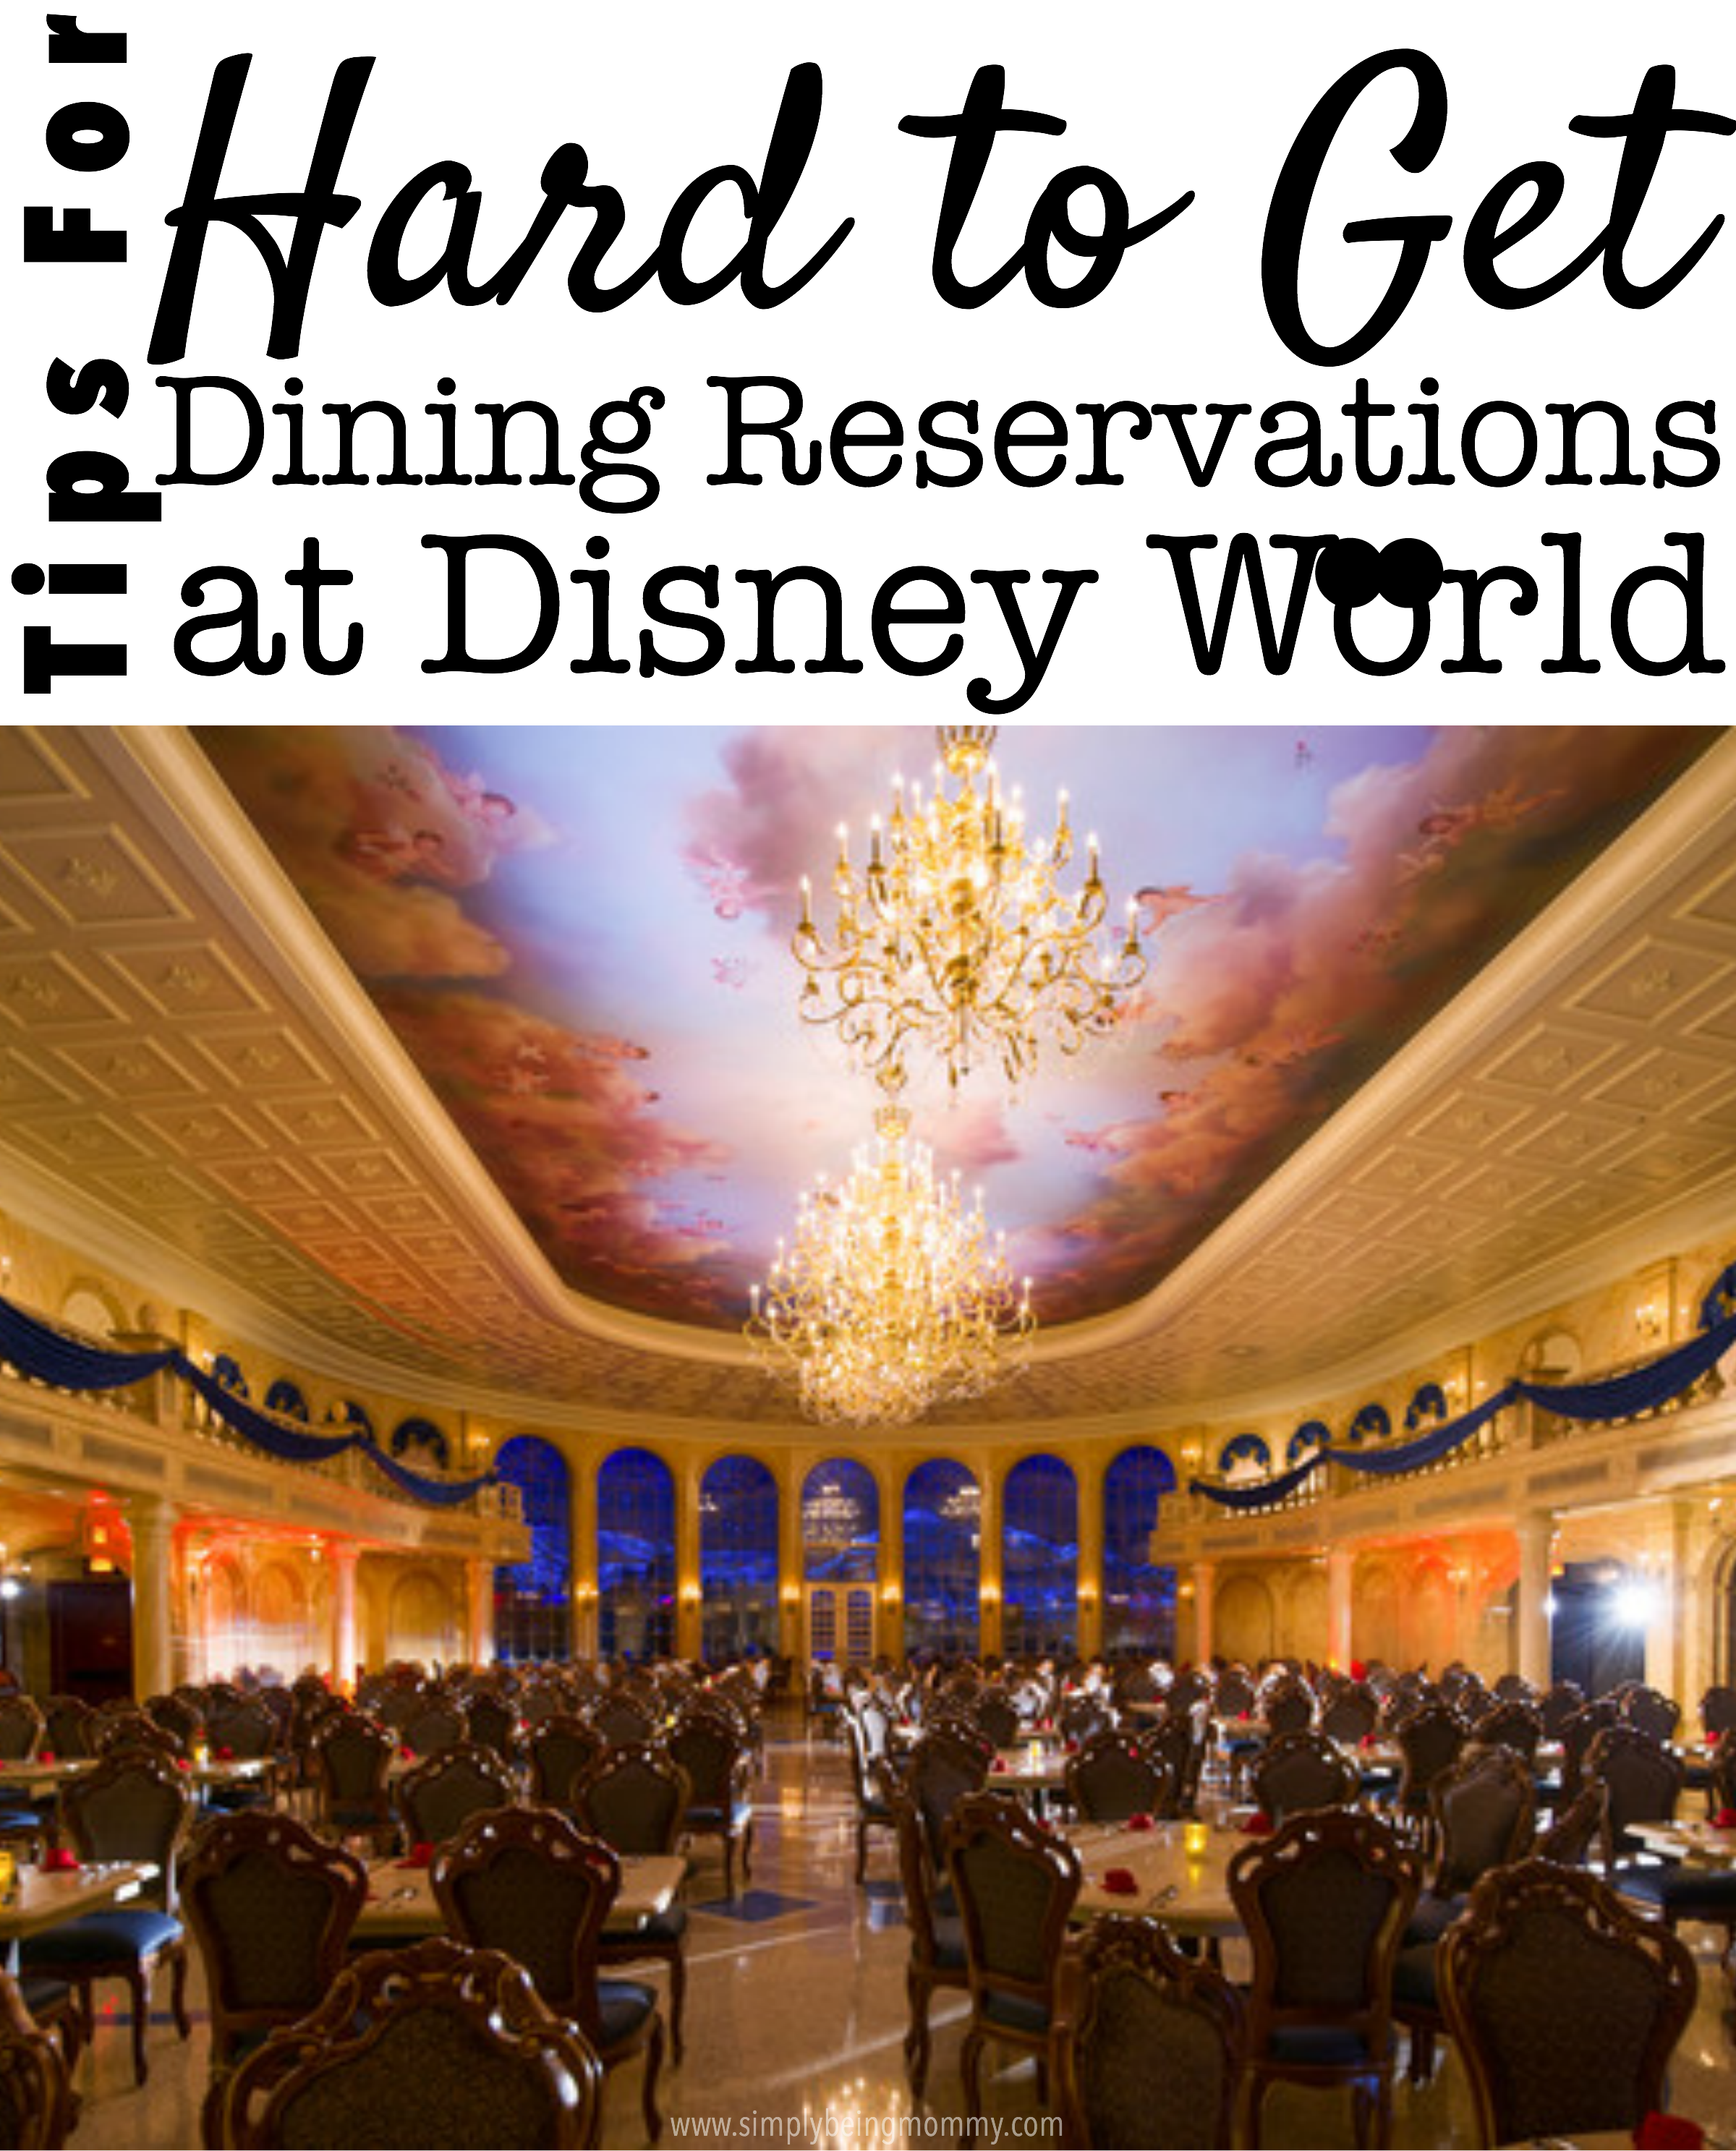 tips for hard to get dining reservations at Disney world